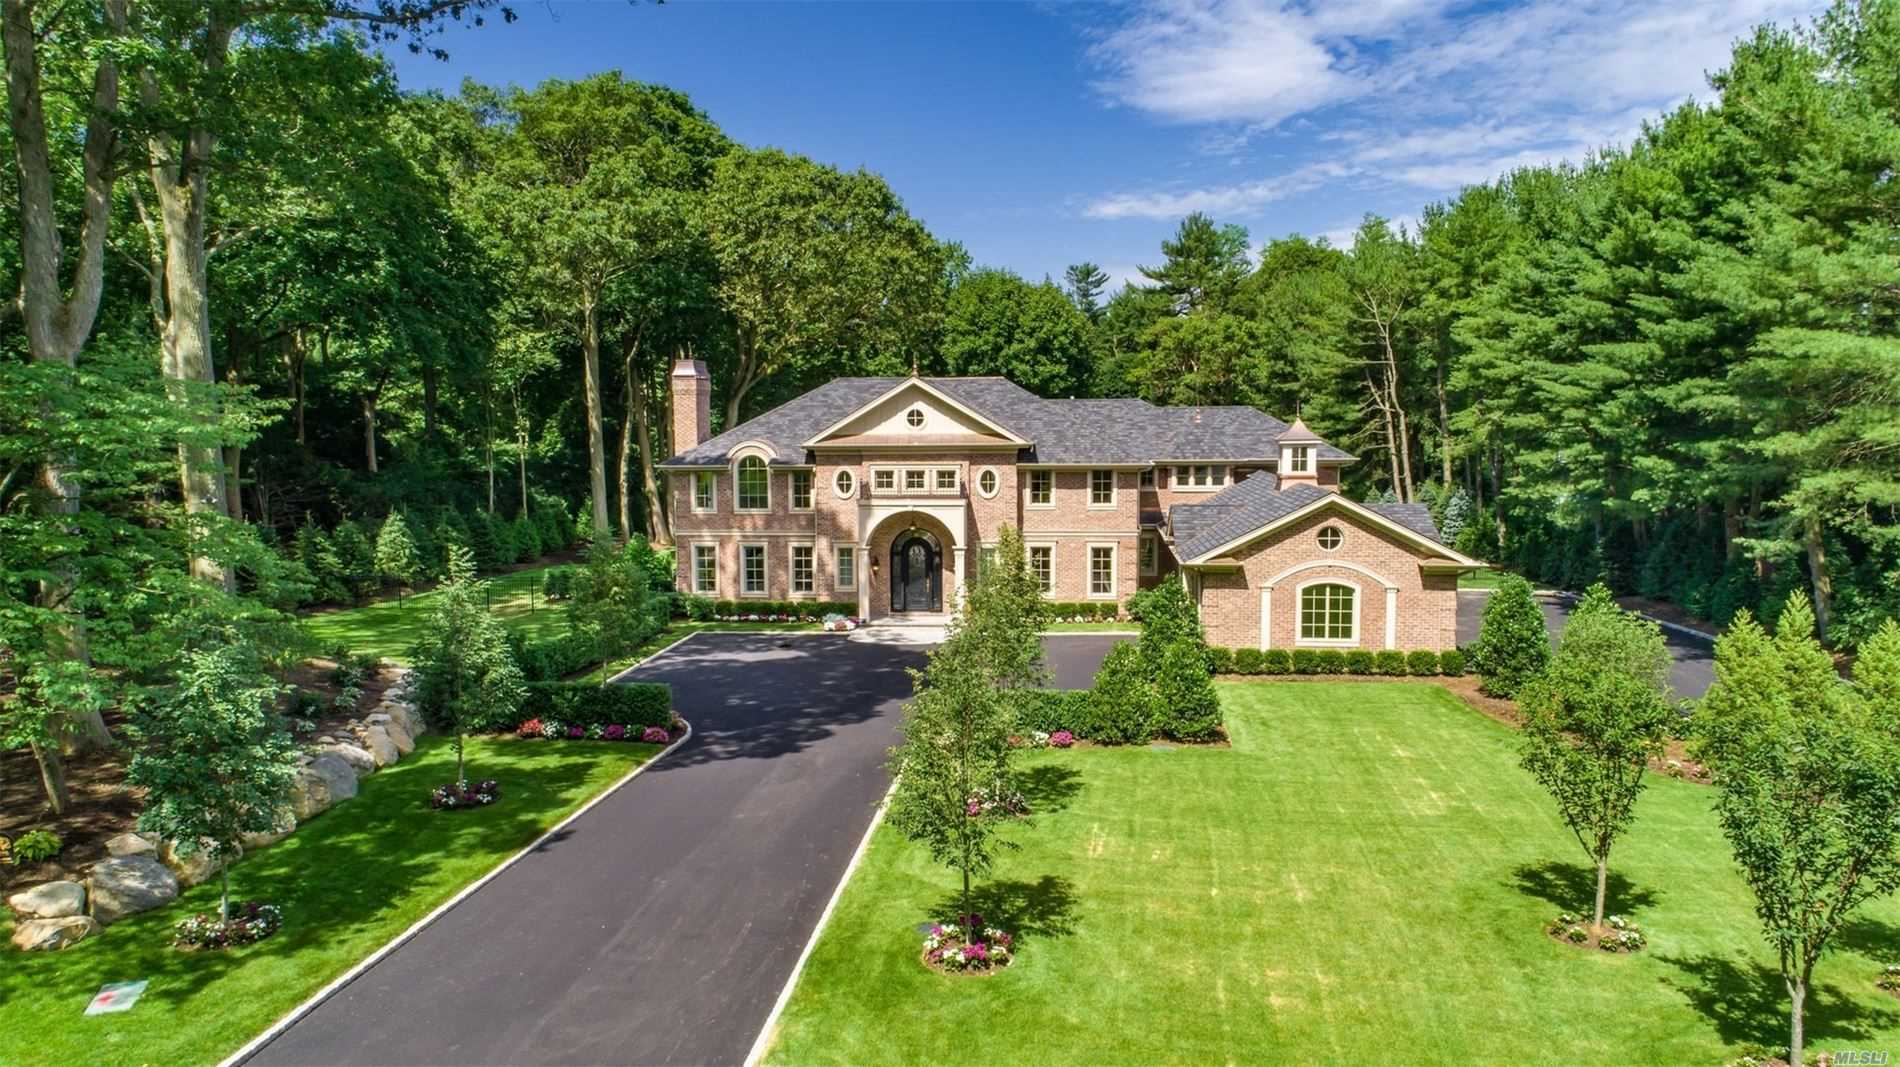 Set on 2 Magnificent Acres in the Village of Old Westbury, this 7500 Square Foot All Brick New Construction is the Ultimate Definition of Quality Craftsmanship and Exceptional Design. Built by Award Winning Rockwell Developers this 6 Bedroom 6.5 Bath Luxury Home Features Custom Ceiling Details and Recessed Wall Panels Throughout, a State of the Art Kitchen, Swimming Pool with Jacuzzi, 3-Car Garage with Custom Doors, Generator and So Much More! East Williston School District.